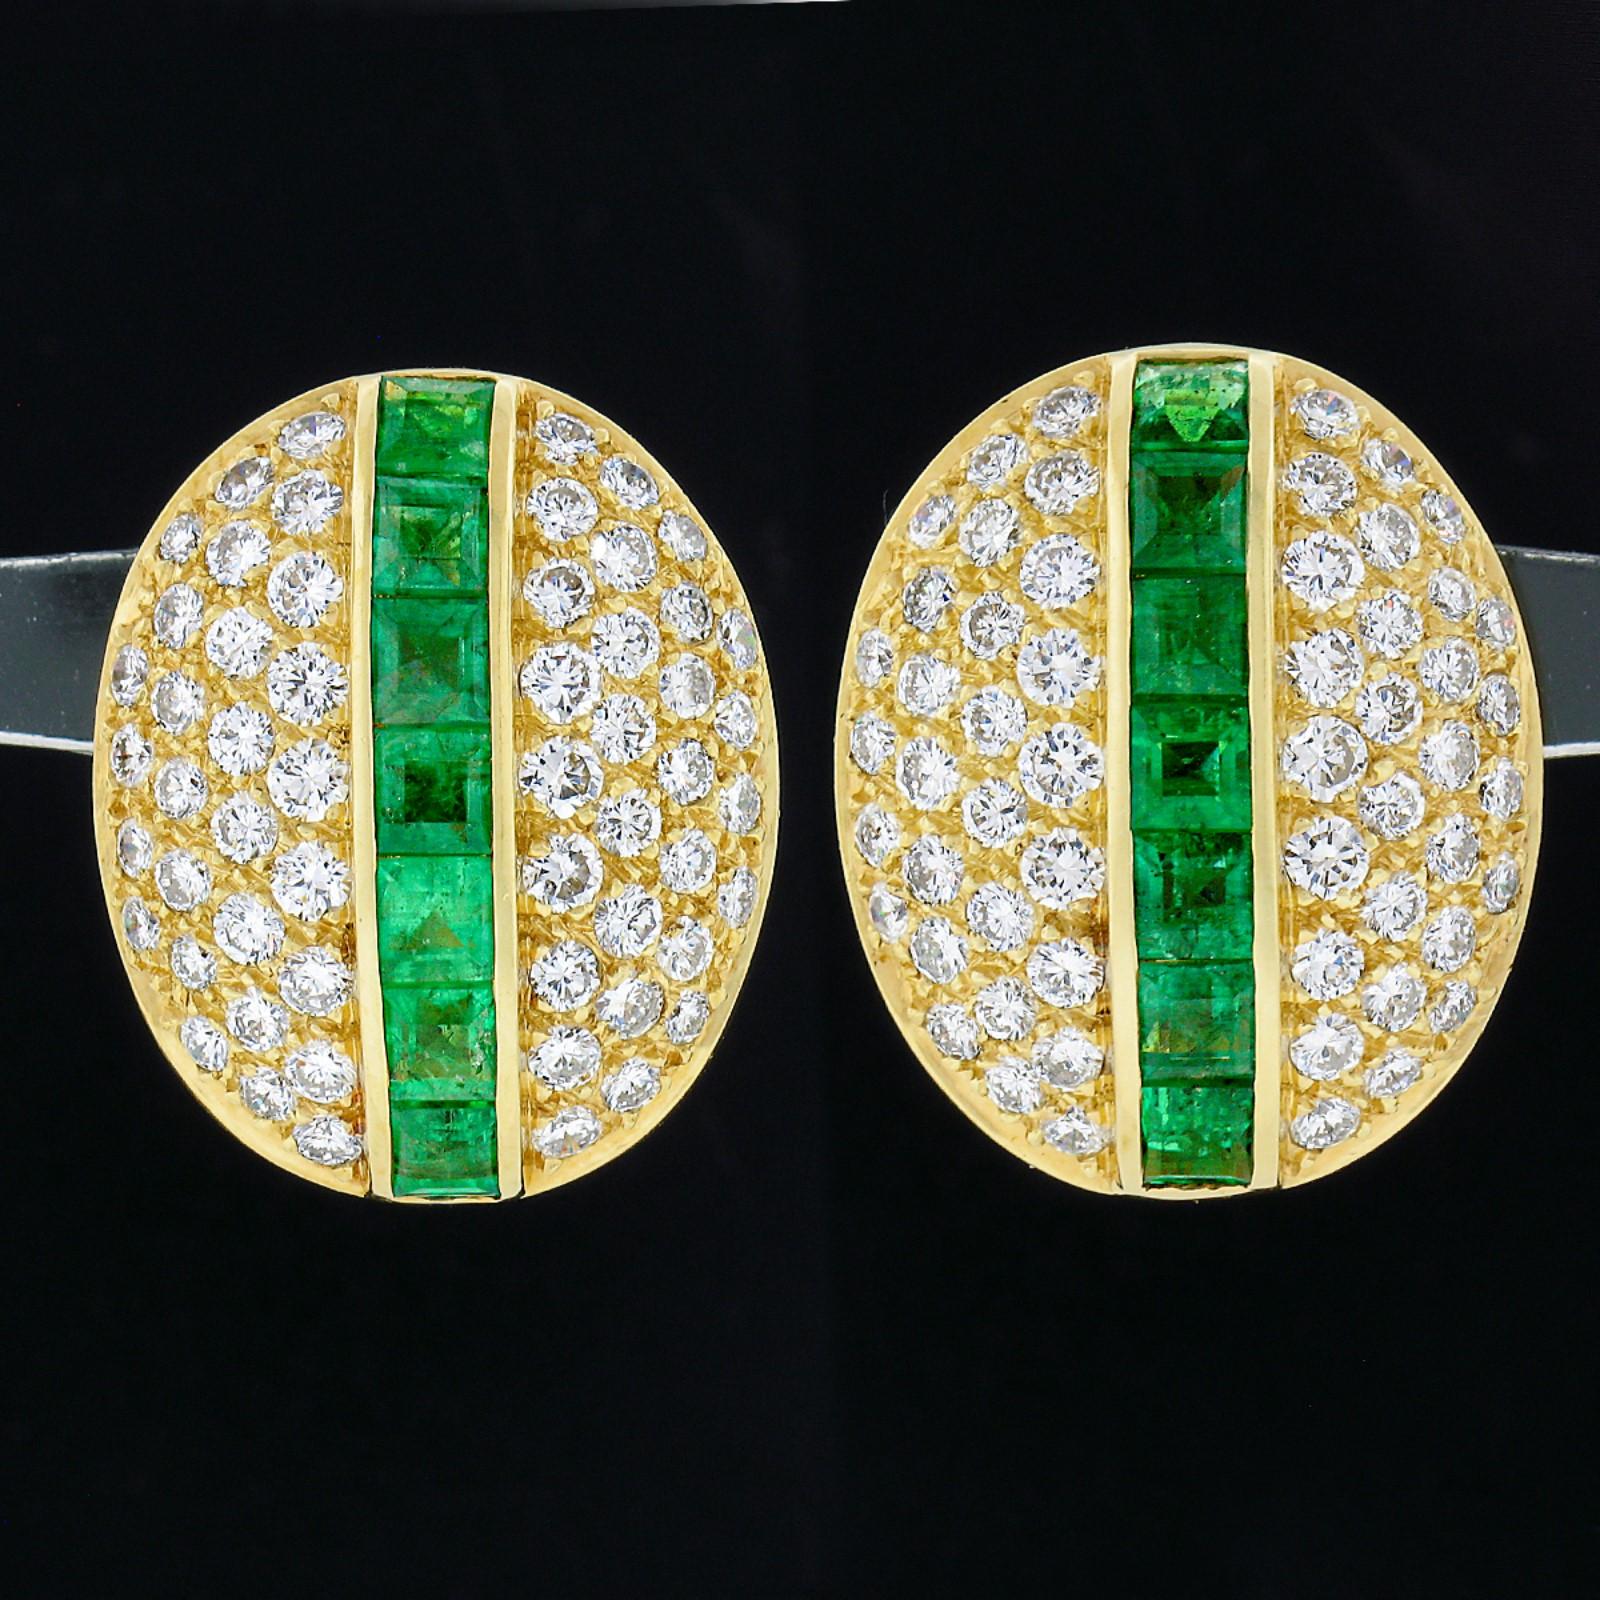 This magnificent vintage pair of natural emerald and diamond statement earrings was crafted from solid 18k yellow gold. The earrings feature beautiful square step cut emeralds that are perfectly channel set down the slightly raised center of the